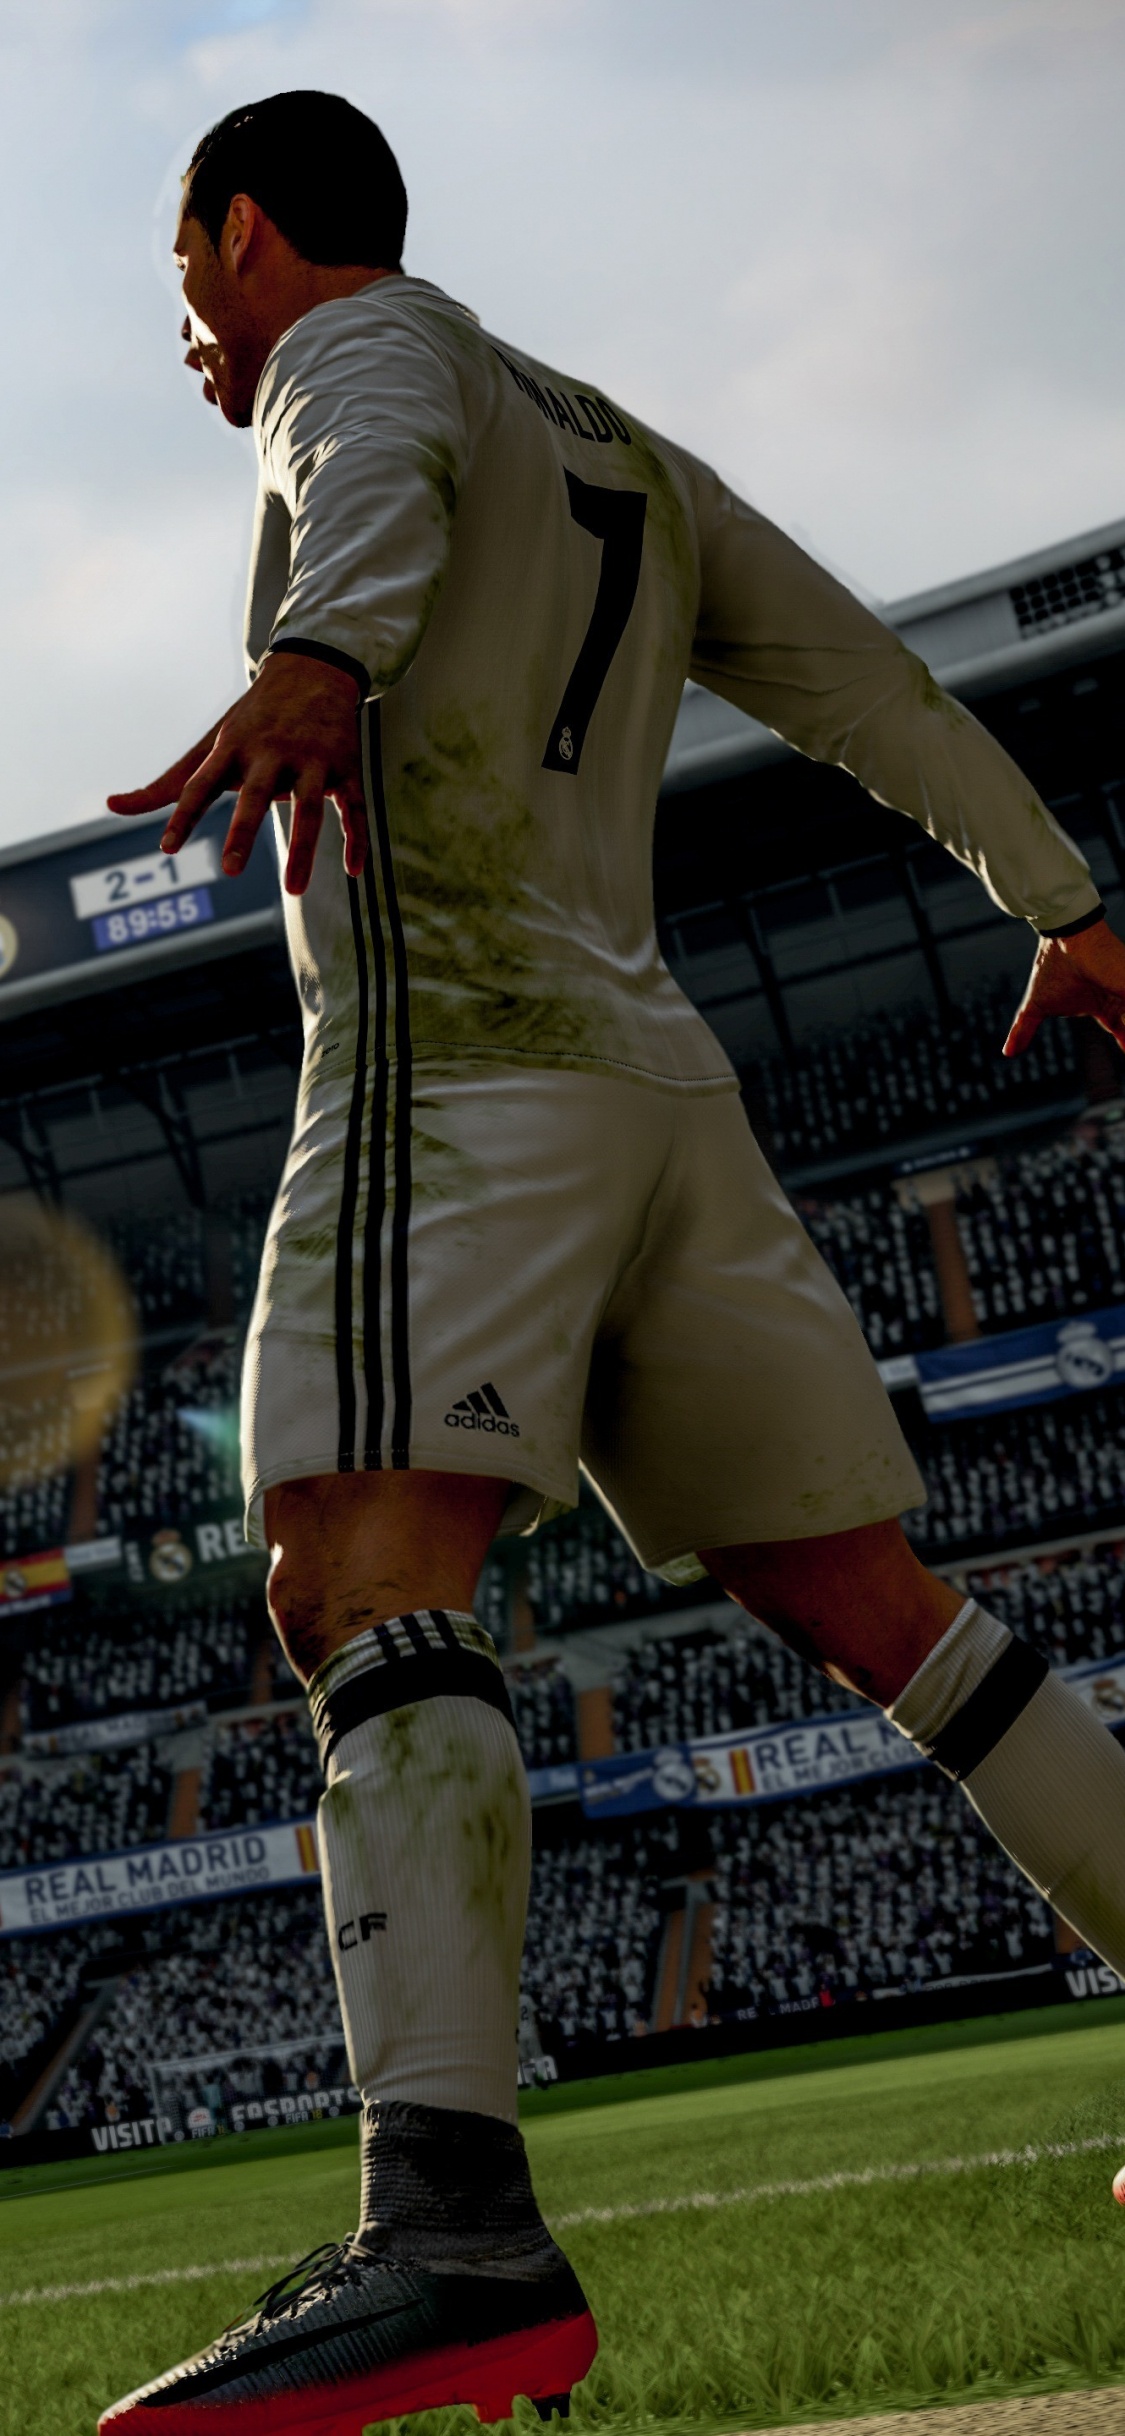 FIFA 18, ea Sports, Electronic Arts, Sports Venue, Stadion. Wallpaper in 1125x2436 Resolution